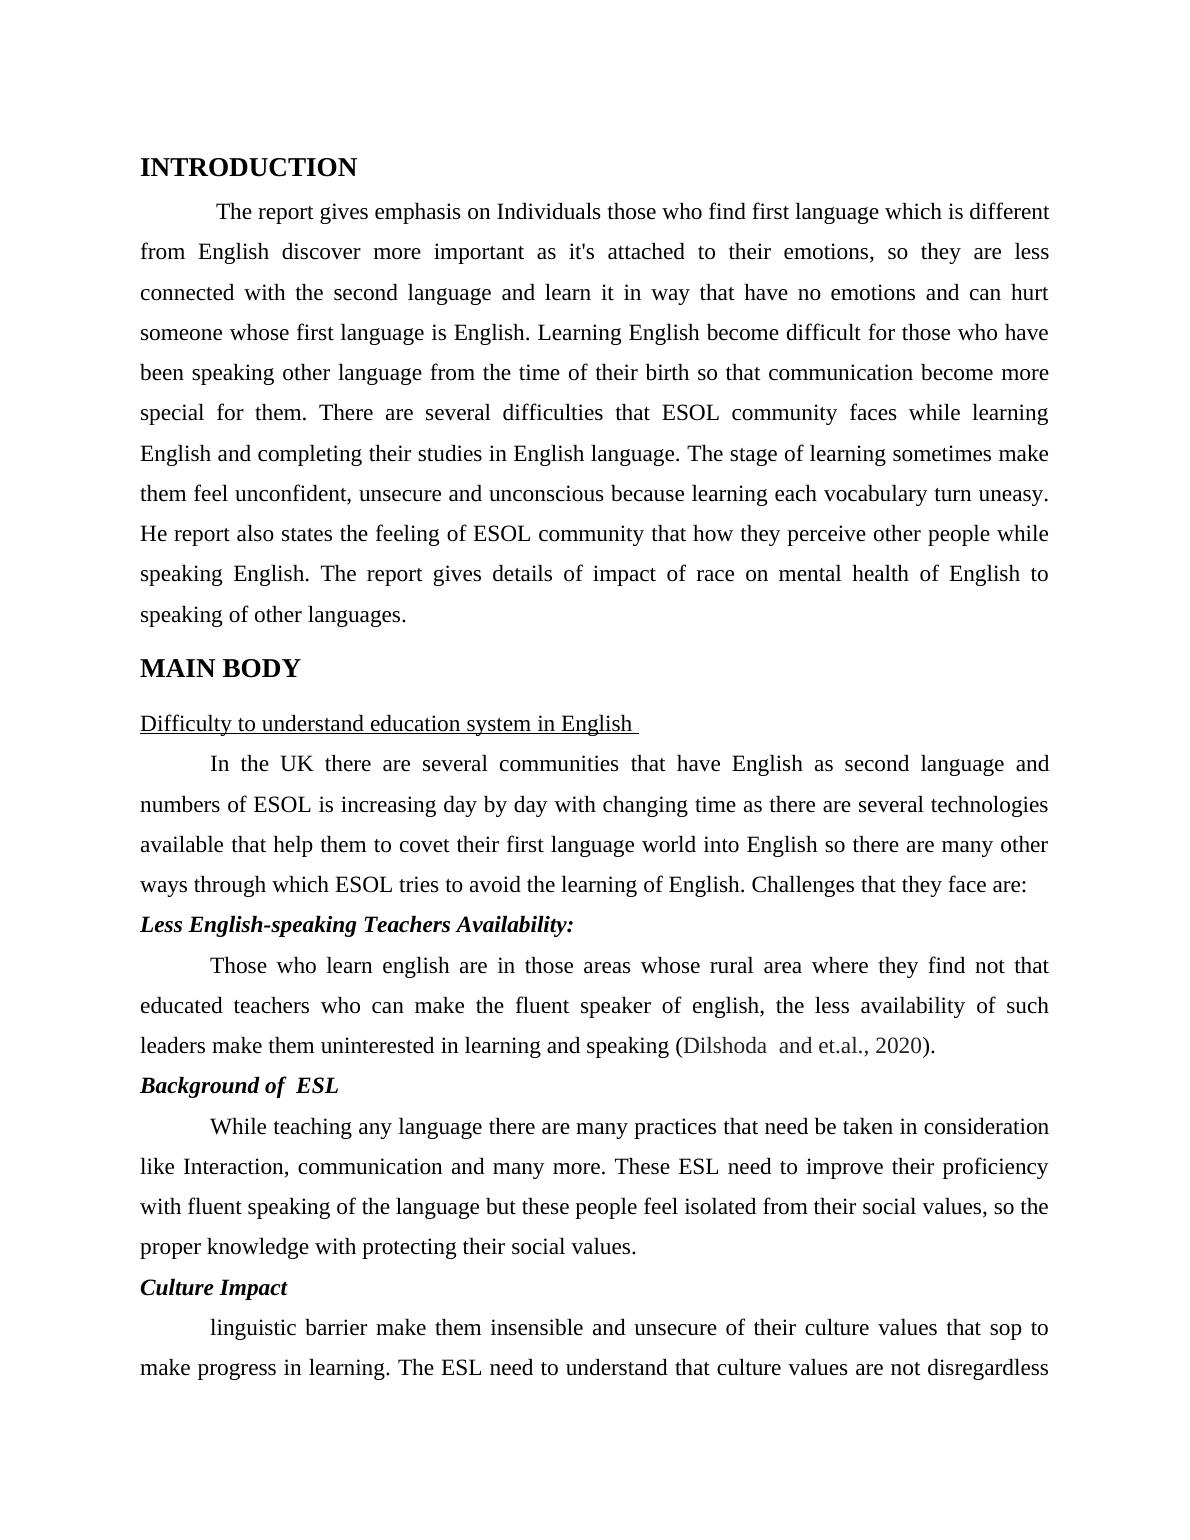 The Impact of English as a Second Language and Race (Essay Plan)_2